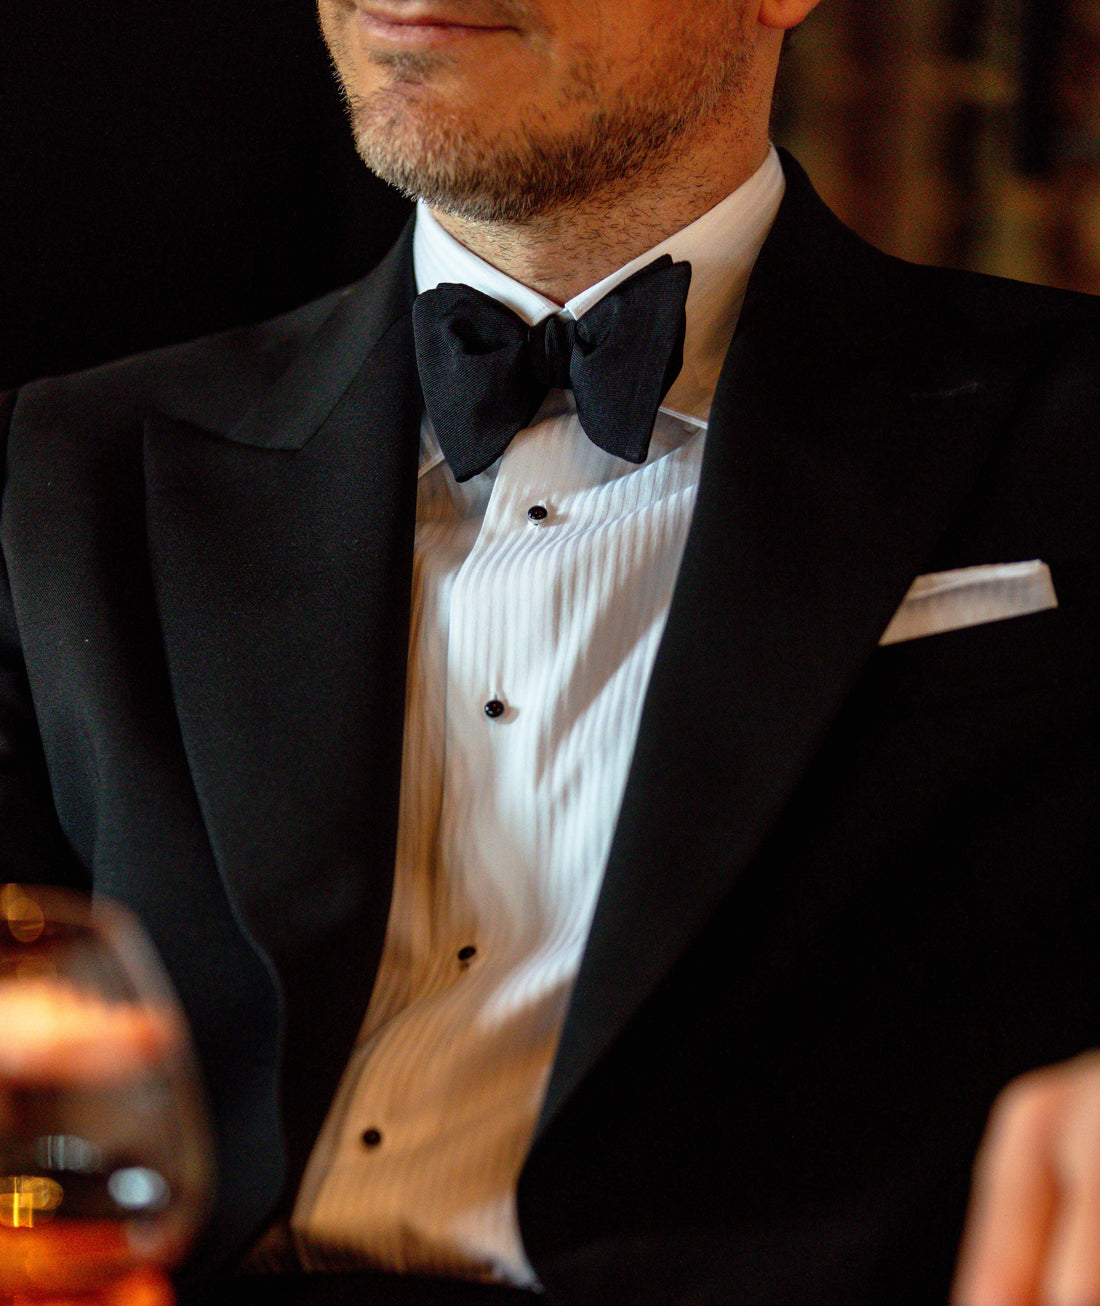 A man in a tuxedo with a bow tie and white shirt, holding a glass of wine, partially cropped to show from his chin down.